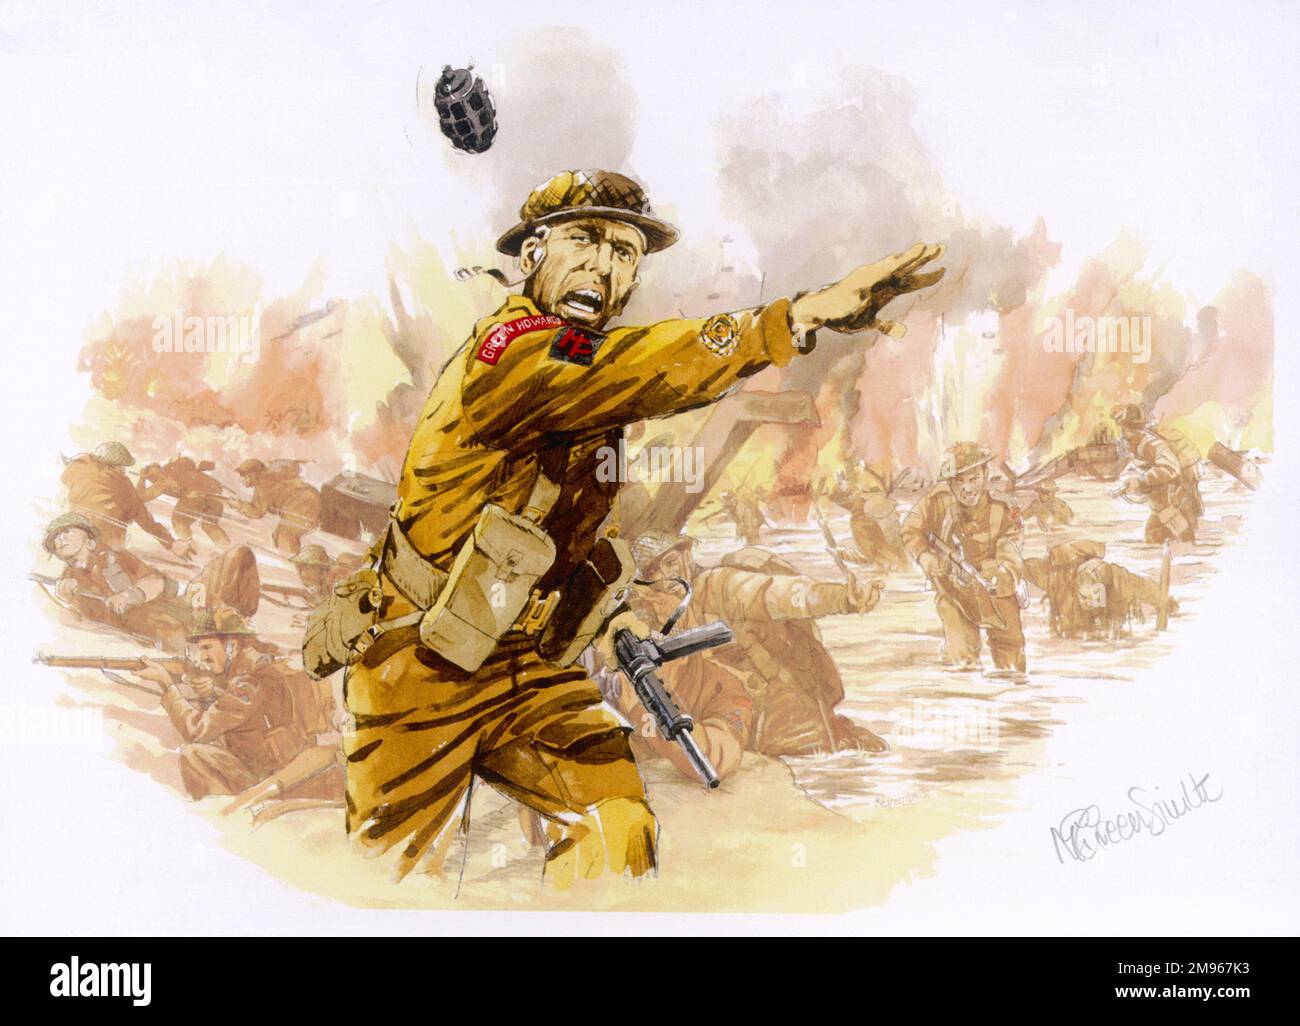 Grenade Assault. A British trooper hurls a hand grenade toward a German position during the assault on the Normandy beaches on 6th June 1944 - D-Day - the second phase of Operation Overlord. Stock Photo